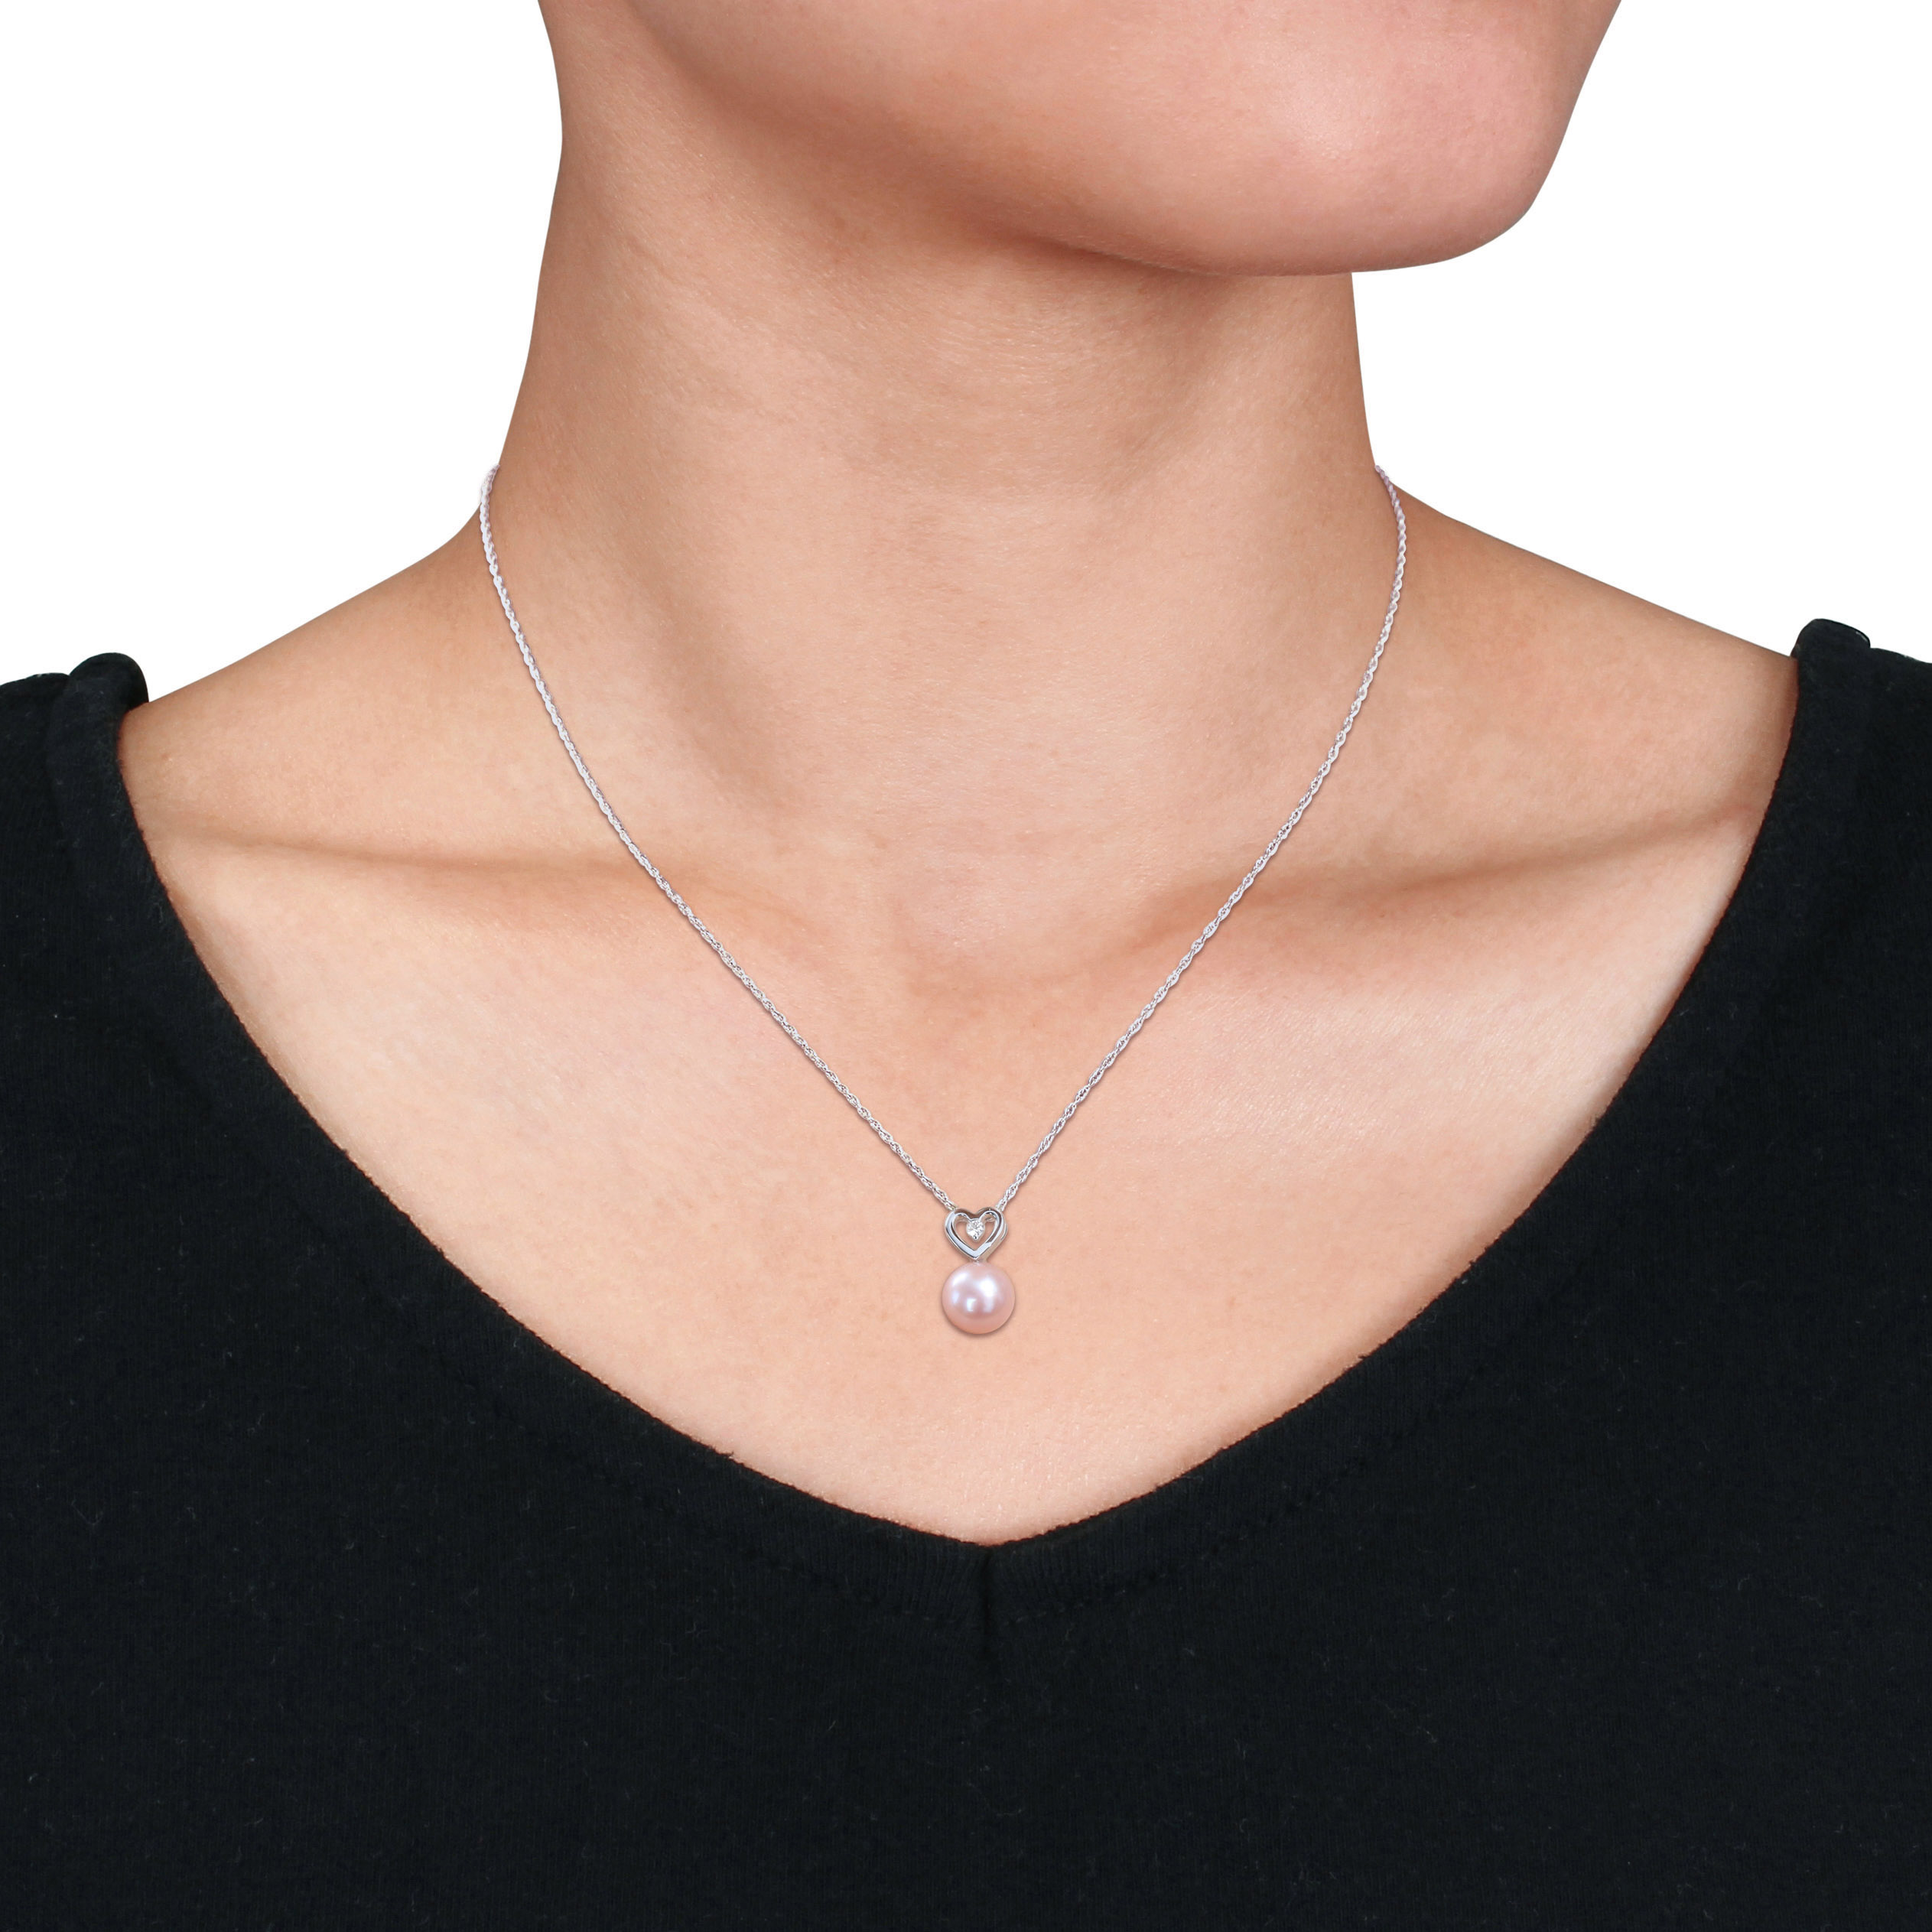 9.5-10 MM Pink Freshwater Cultured Pearl and Diamond Accent Heart Drop Pendant with Chain in 10k White Gold